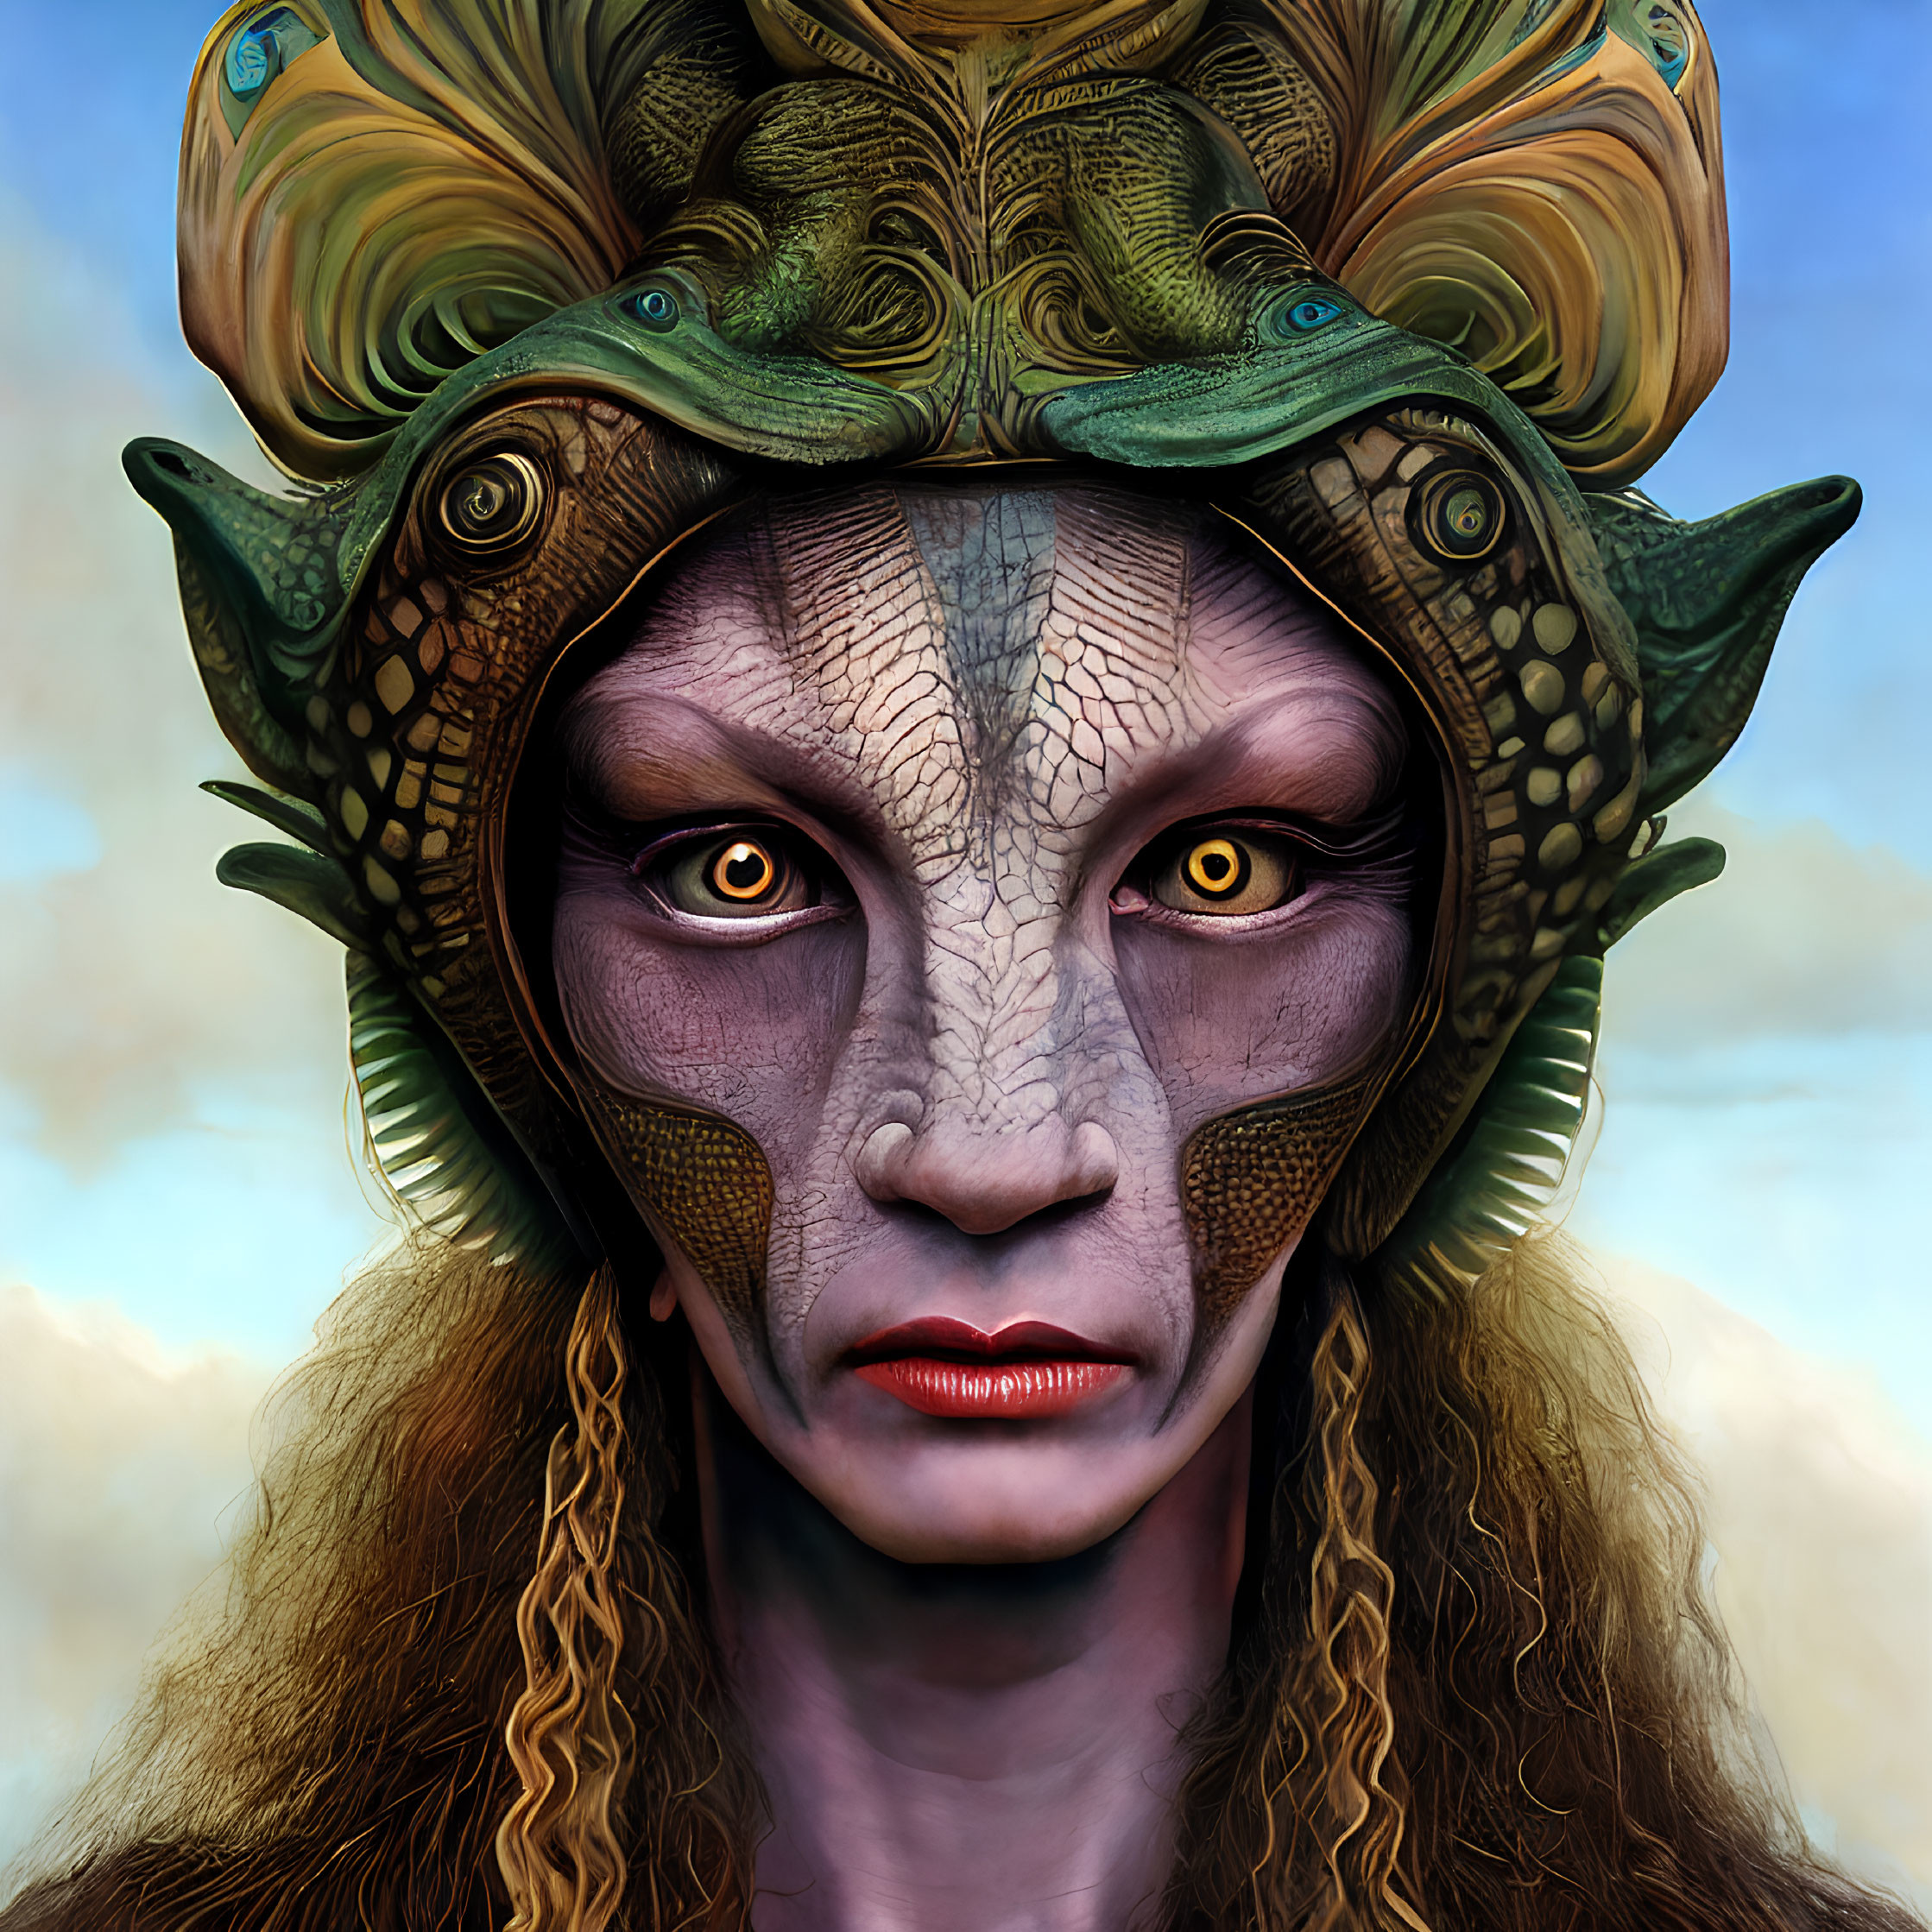 Fantastical portrait of character with scaly skin and serpent headgear